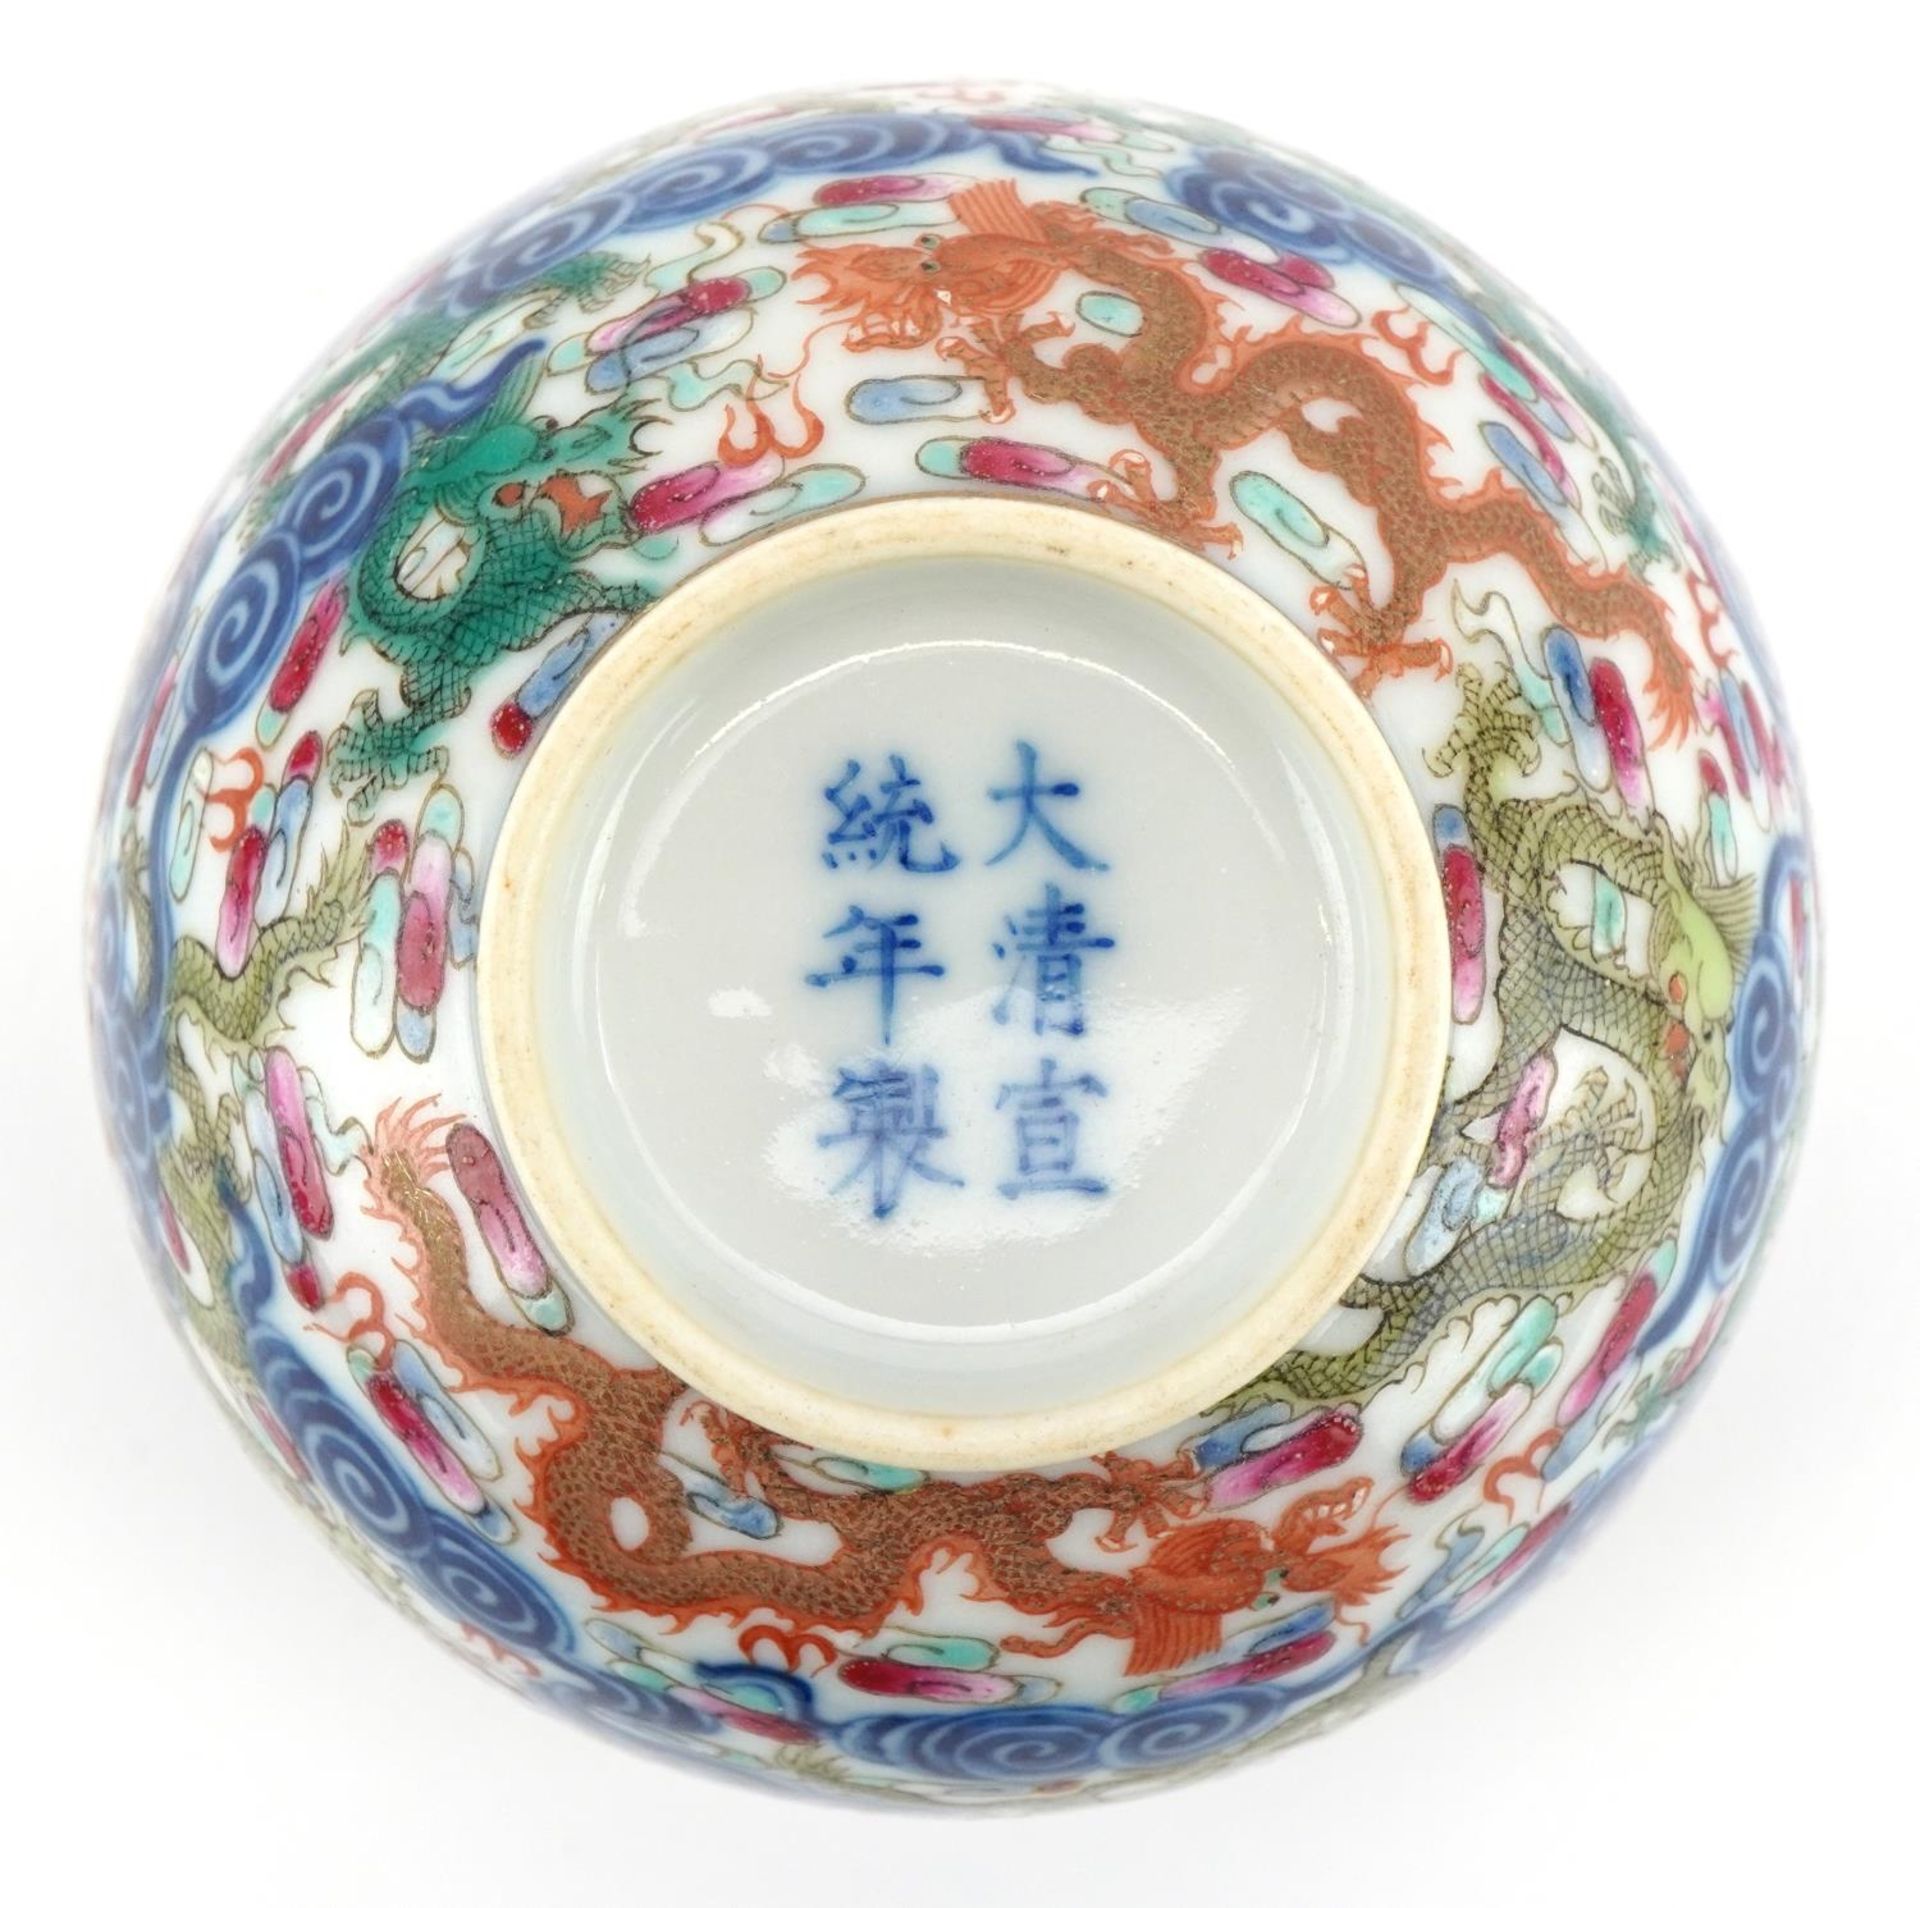 Chinese doucai porcelain tea bowl hand painted with dragons amongst clouds, six figure character - Image 7 of 7